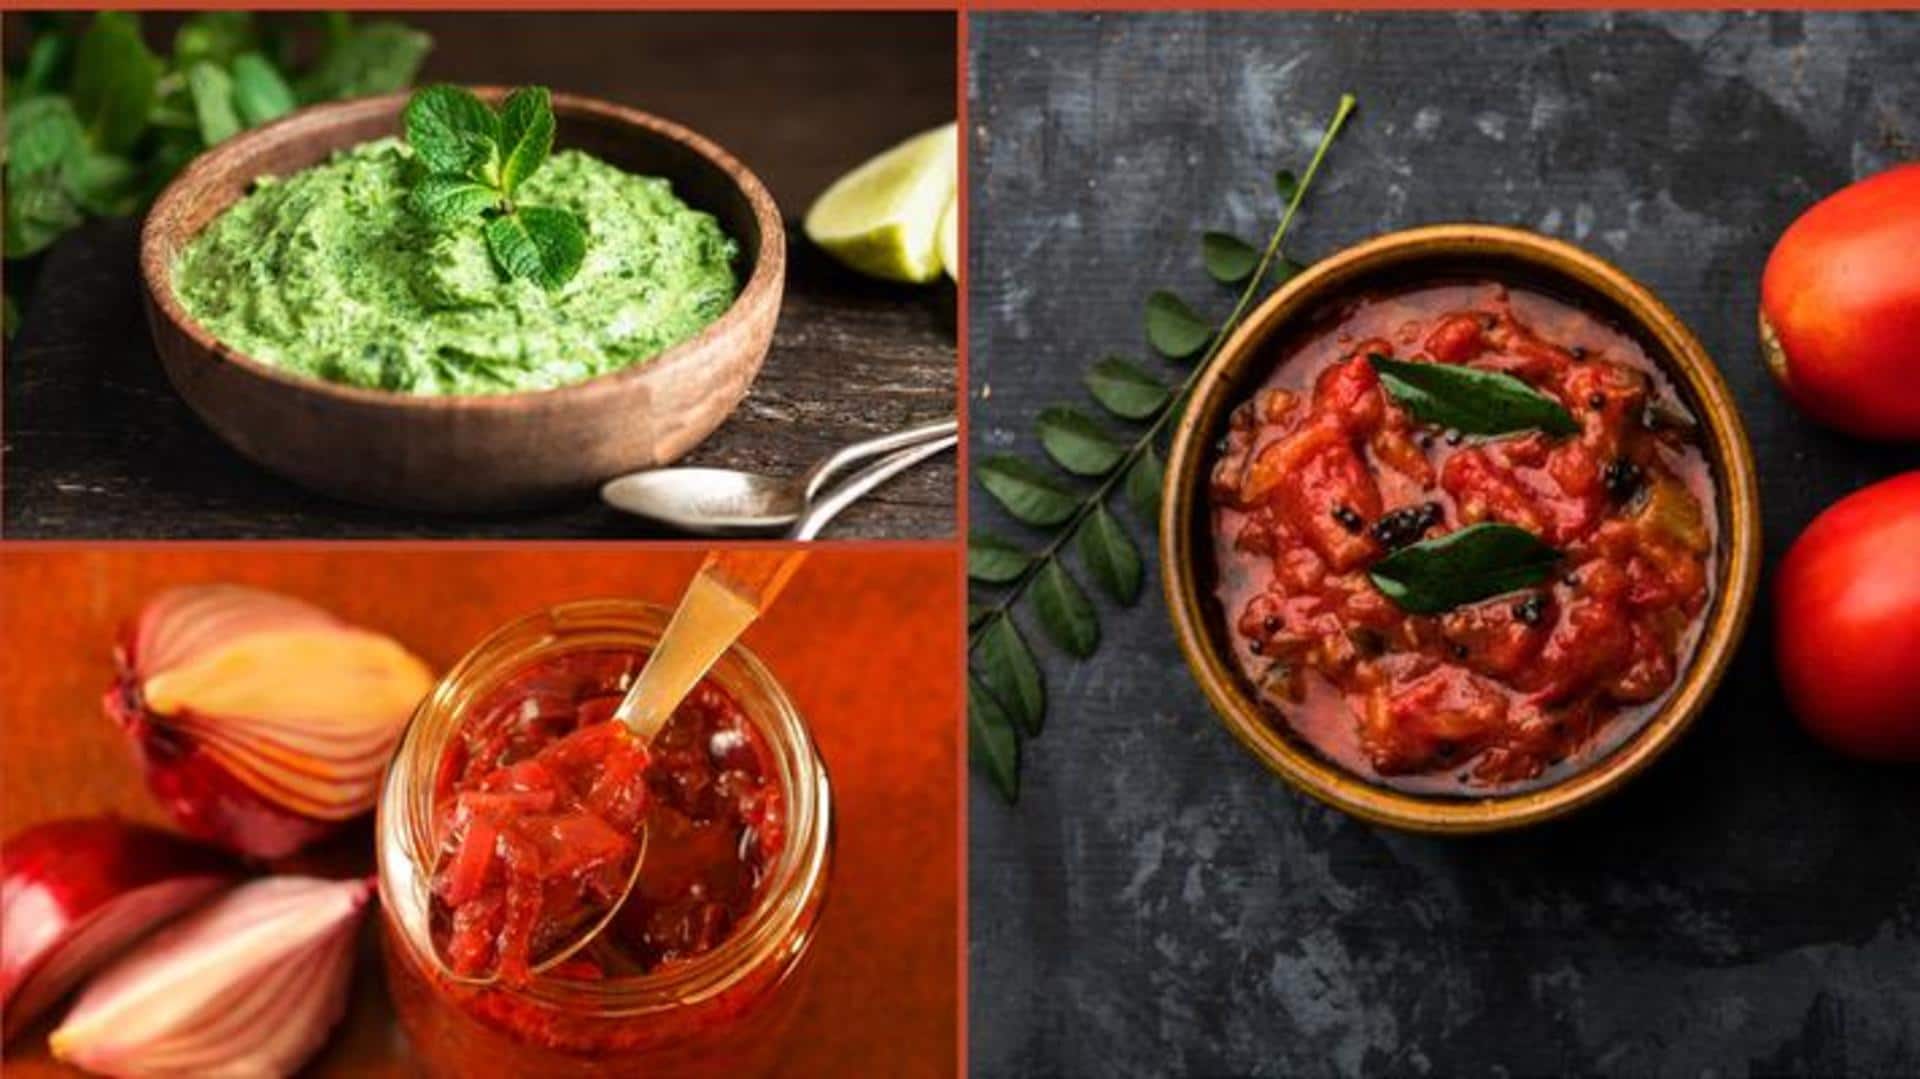 Here are a few popular chutneys to try at home